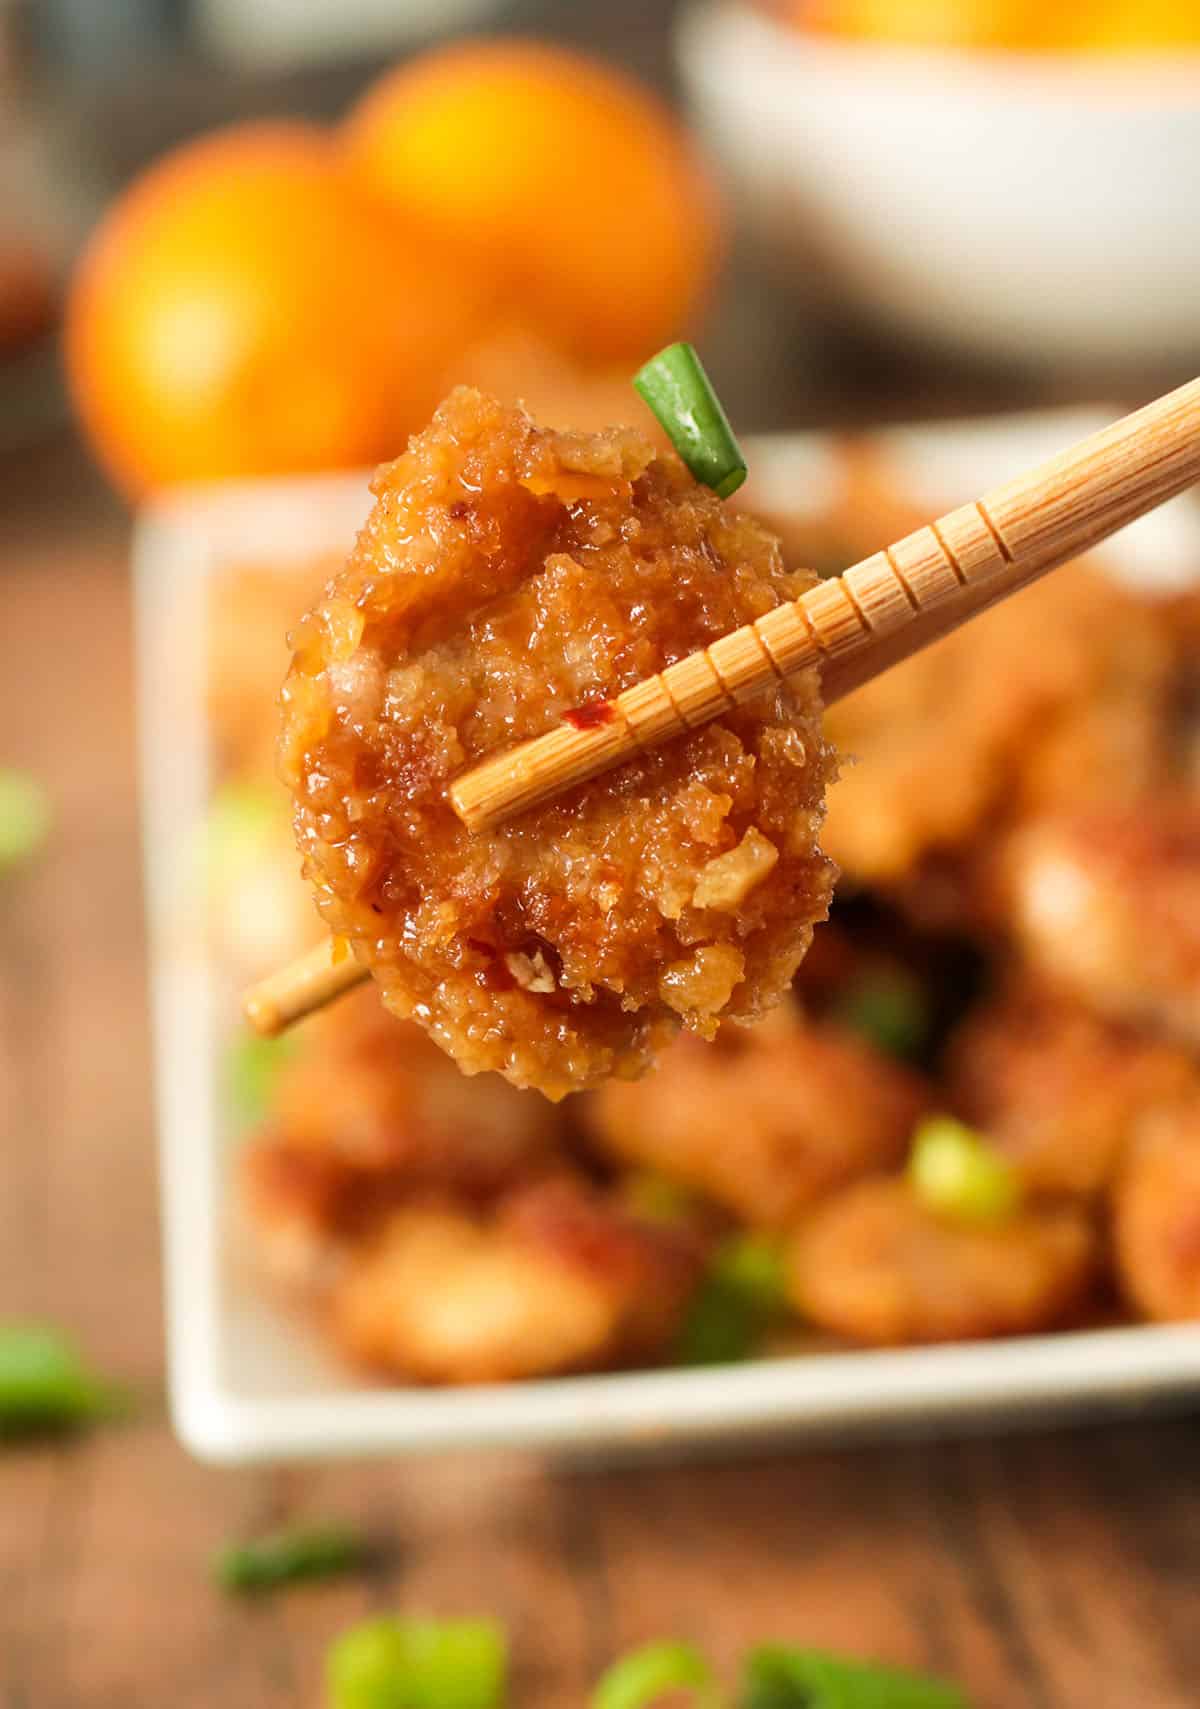 A piece of an orange chicken picked up with a chop stick.